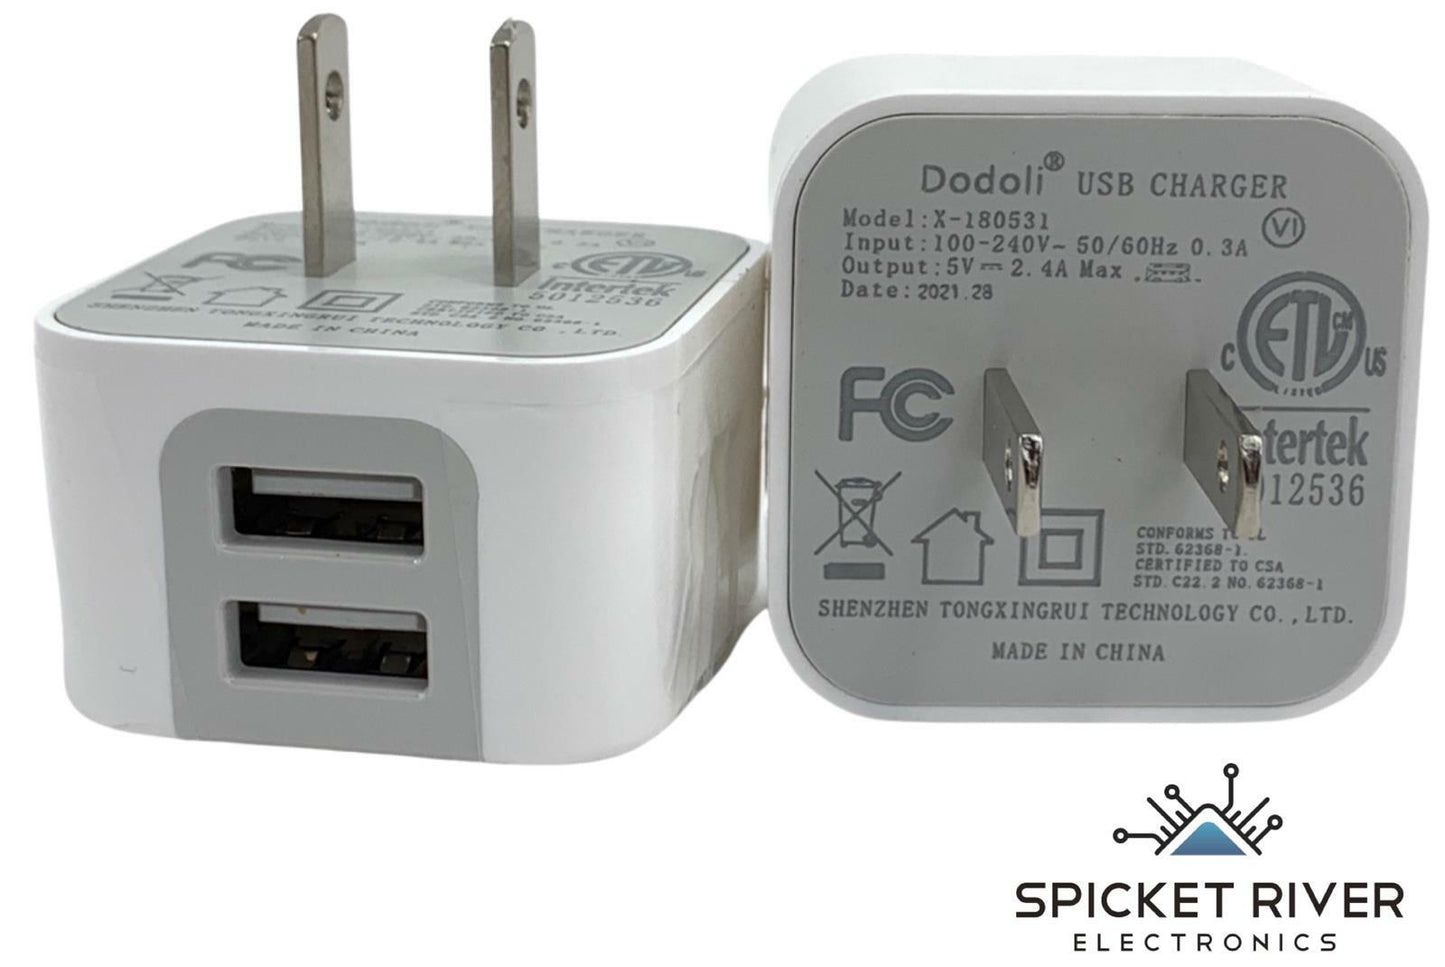 NEW - Pack of 2 - Dodoli X-180531 USB Wall Charger 12W 2.4A - White